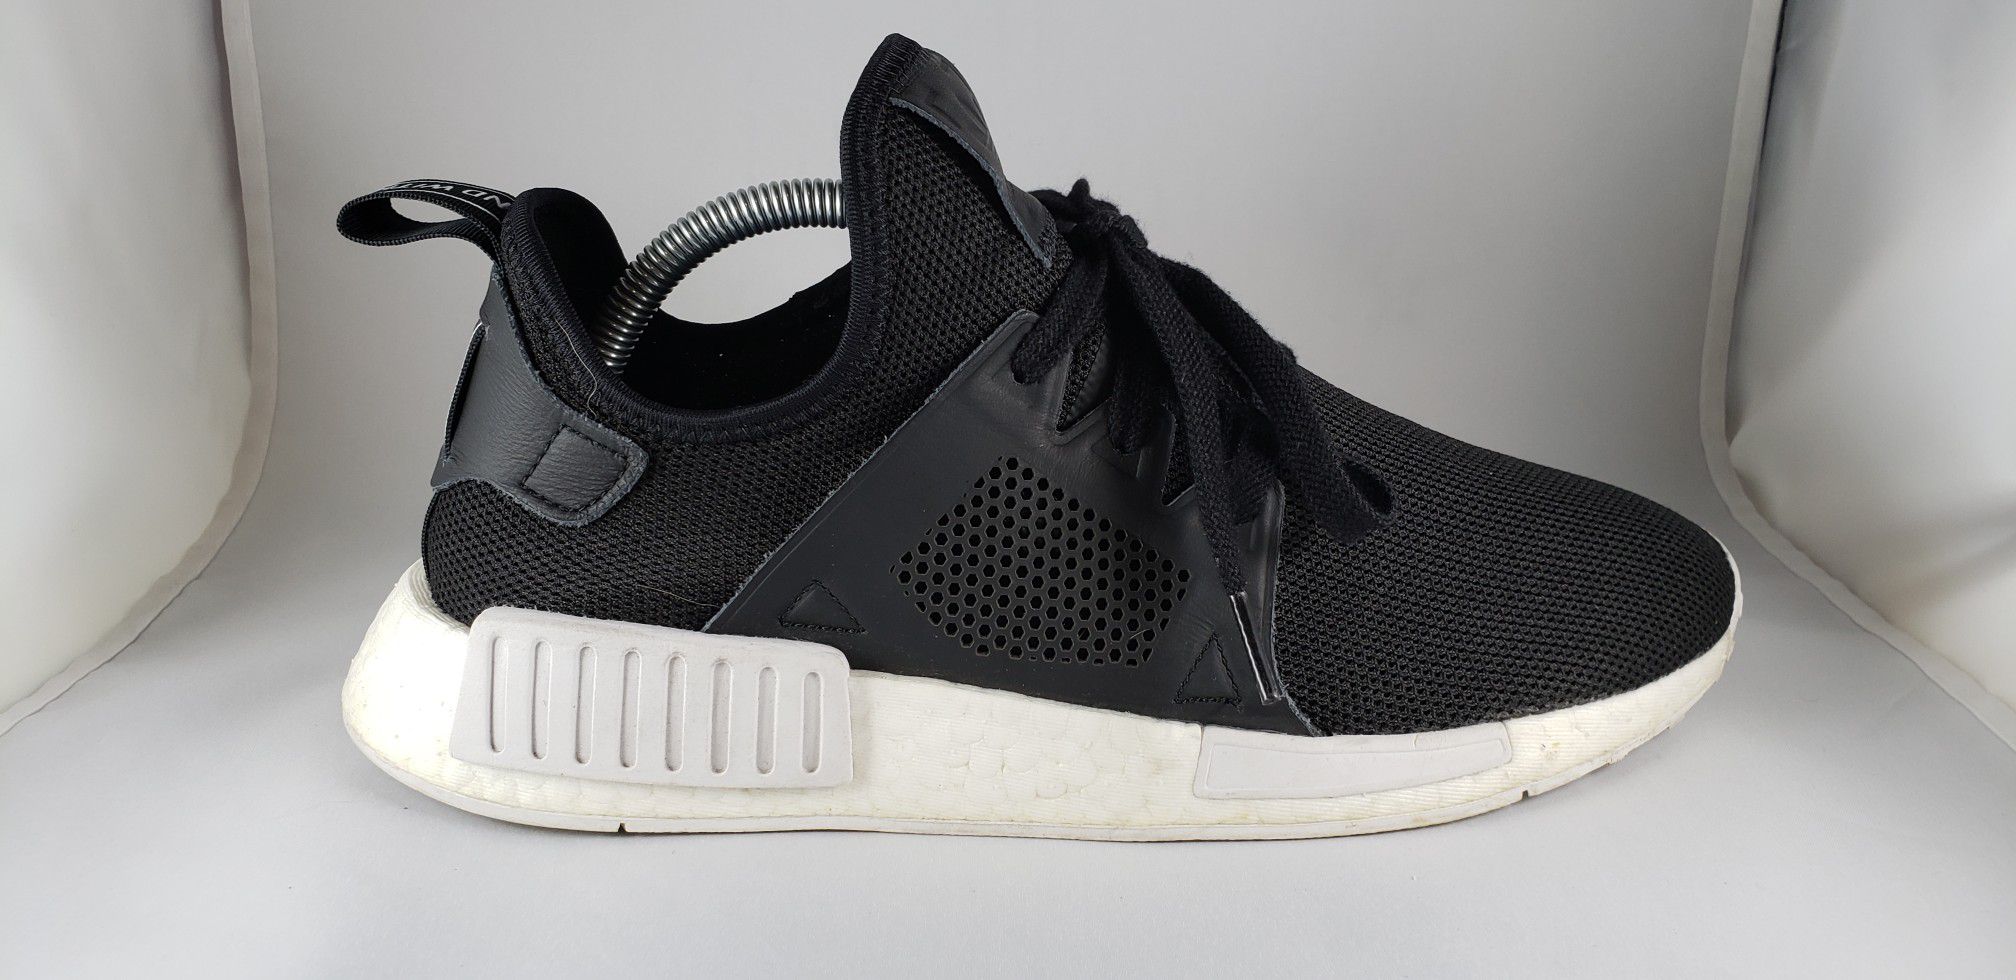 Adidas NMD XR1 size 8 used